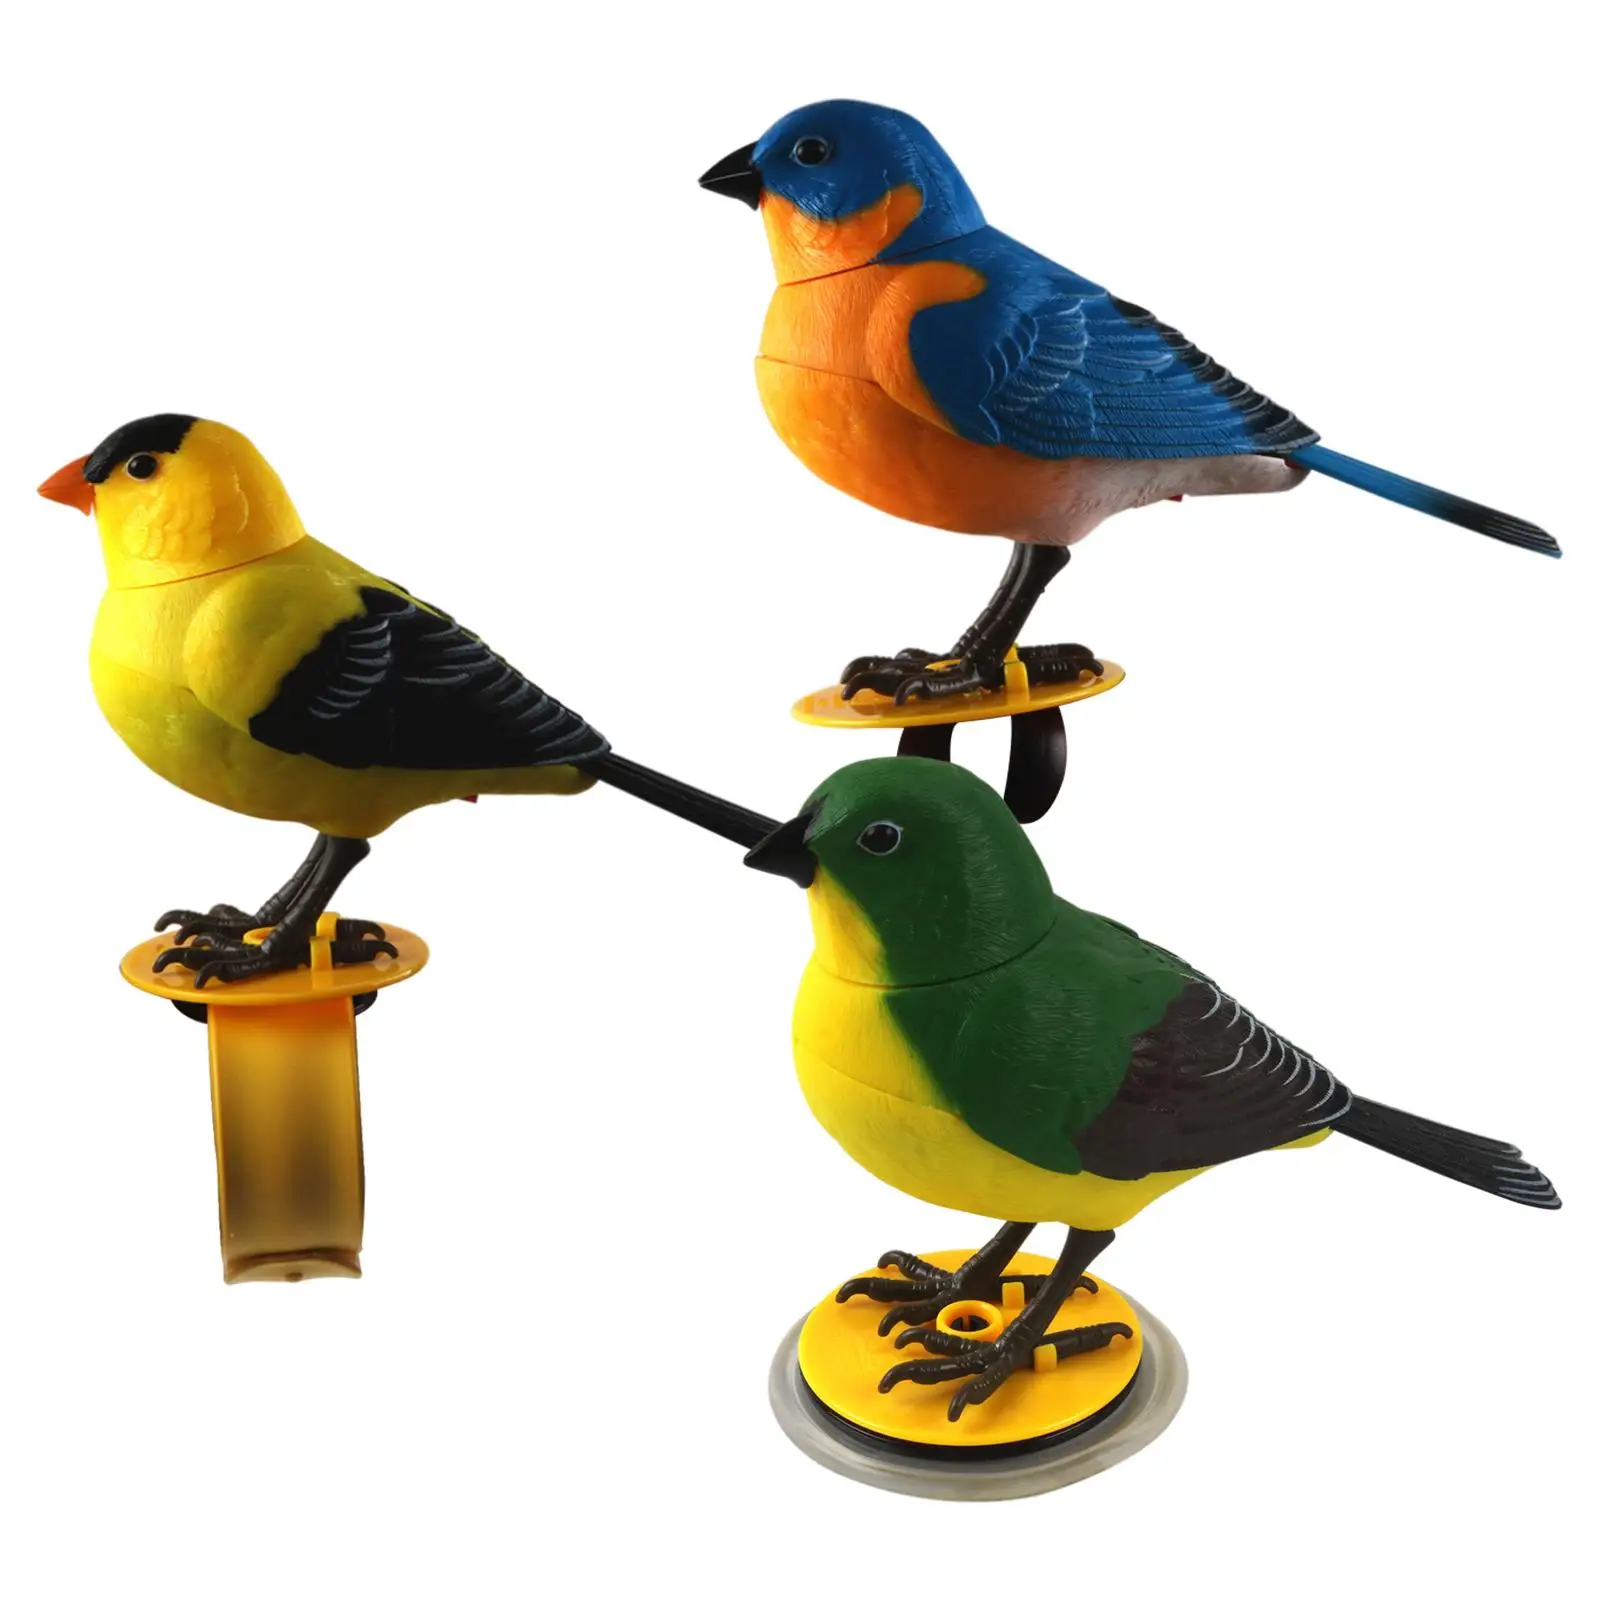 Simulated Sounding Voice Activated Bird Figure Model Music Educational Toys